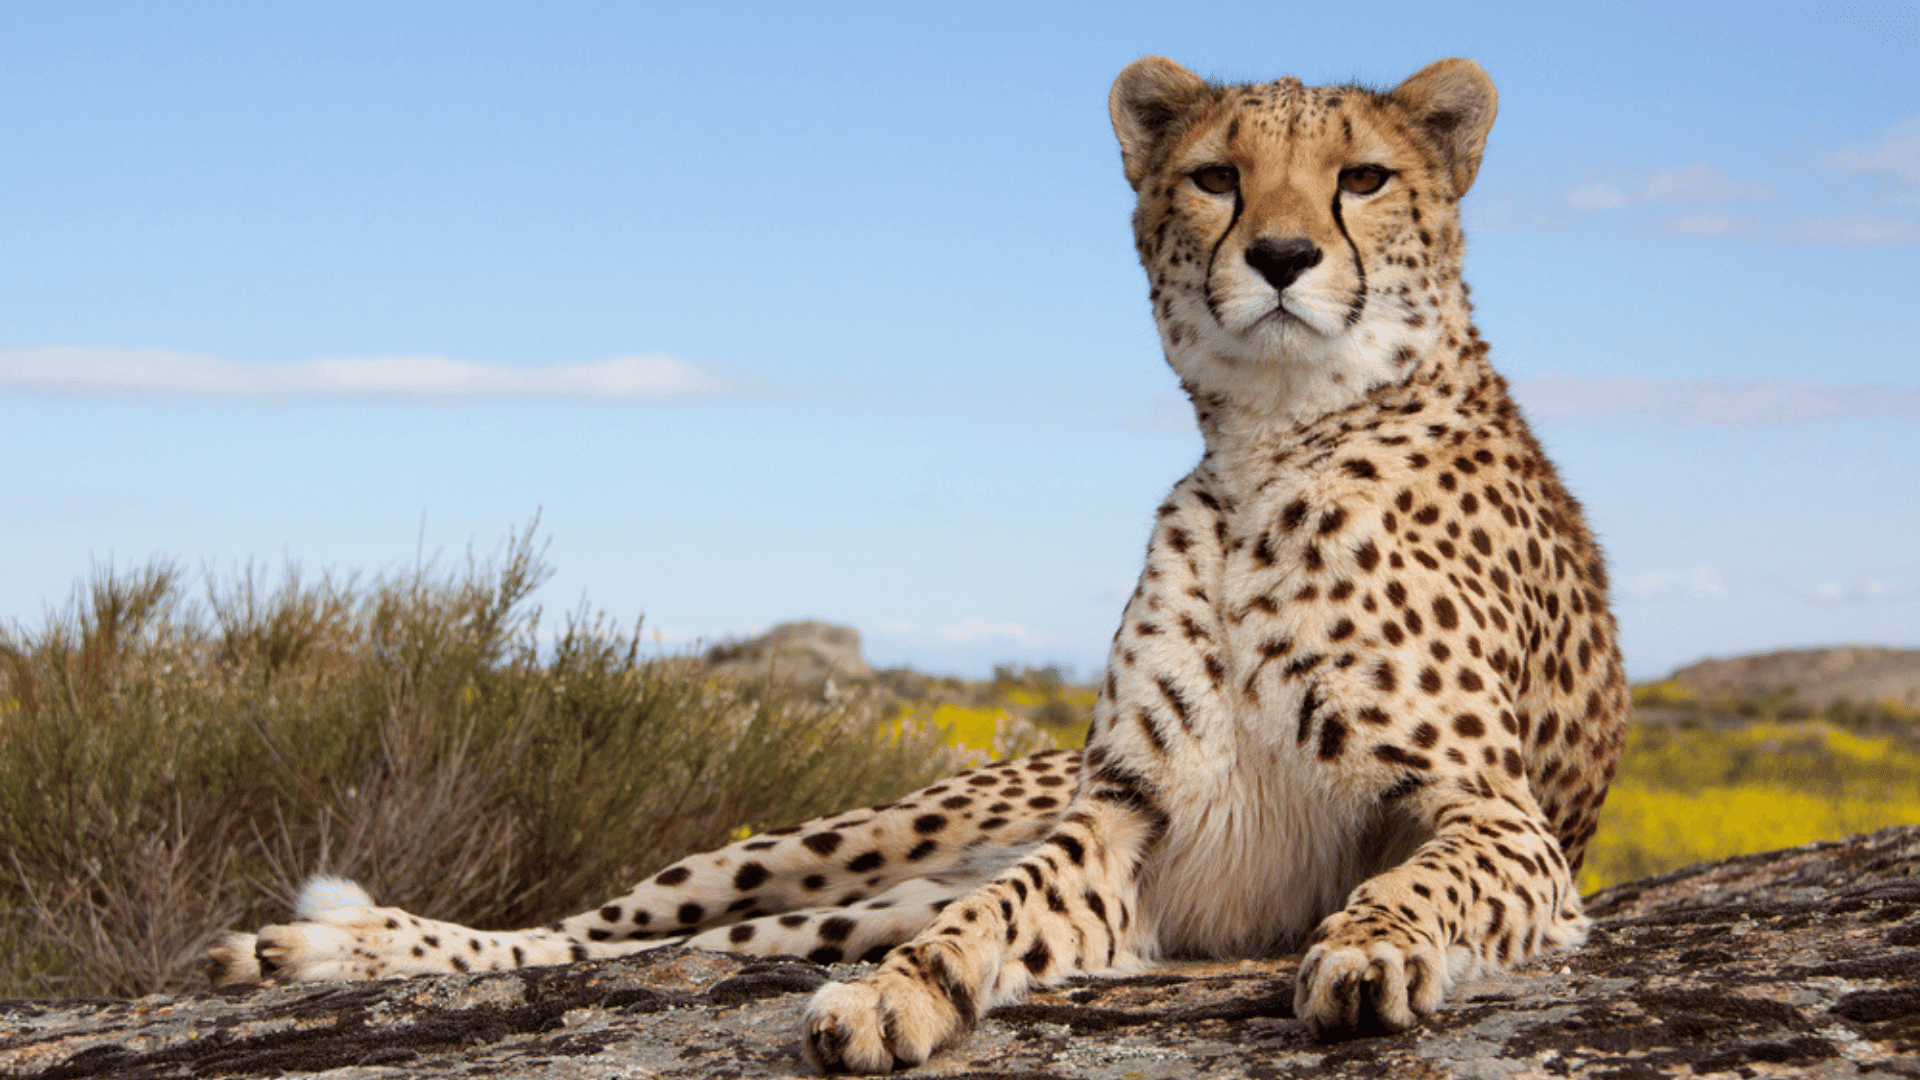 Cheetah Laying on Rock Cats Can Distinguish Between Human Voices